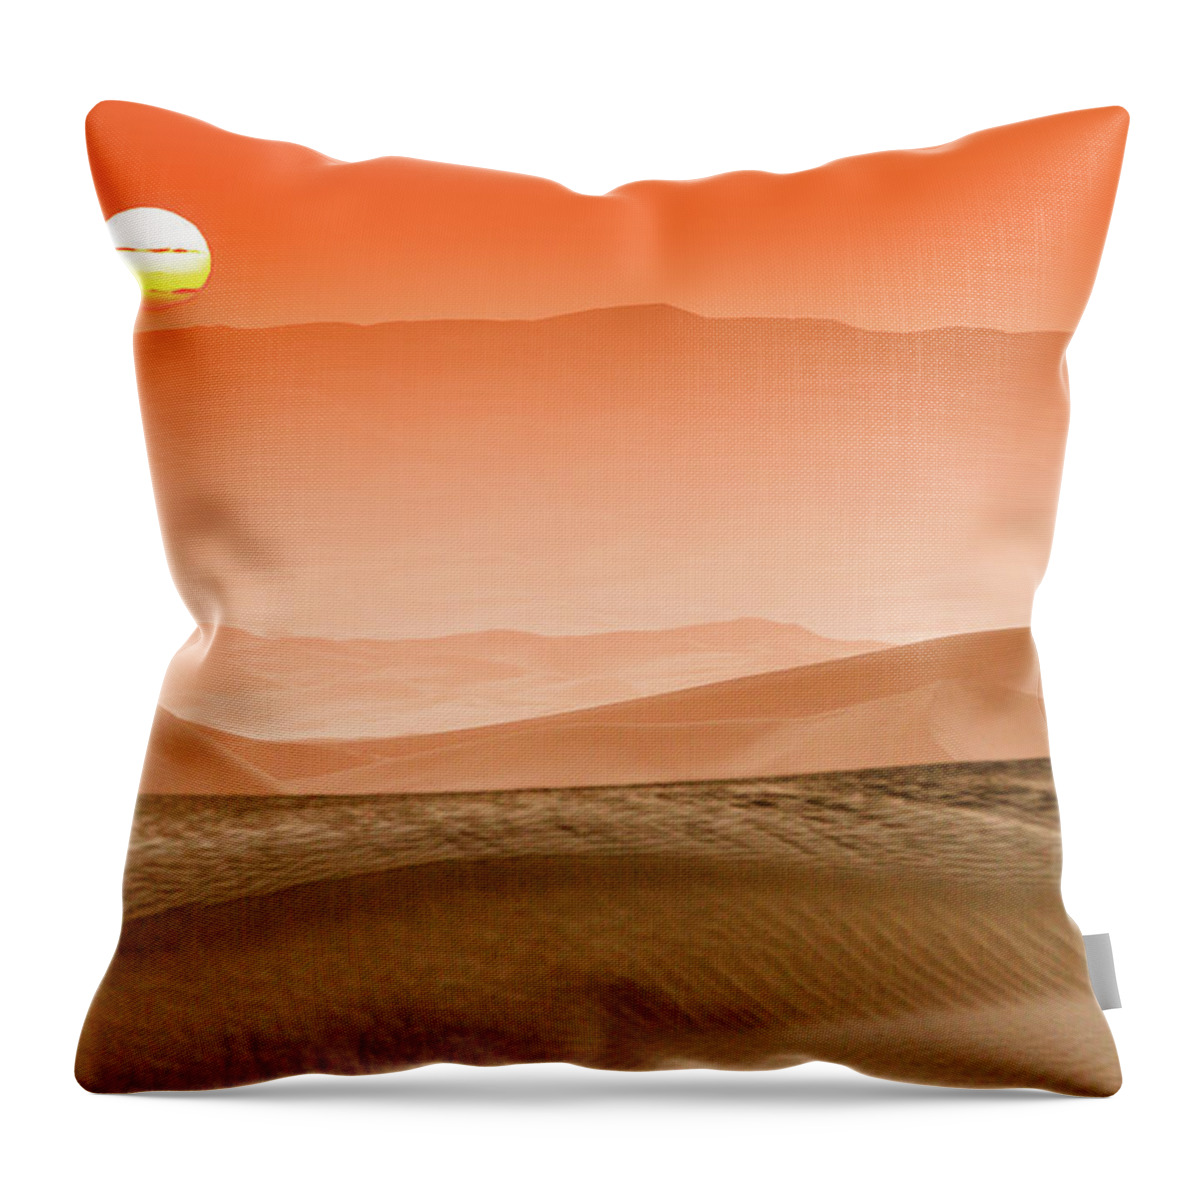 Tranquility Throw Pillow featuring the photograph Sunrise In Taklamakan Desert, Xinjiang by Feng Wei Photography